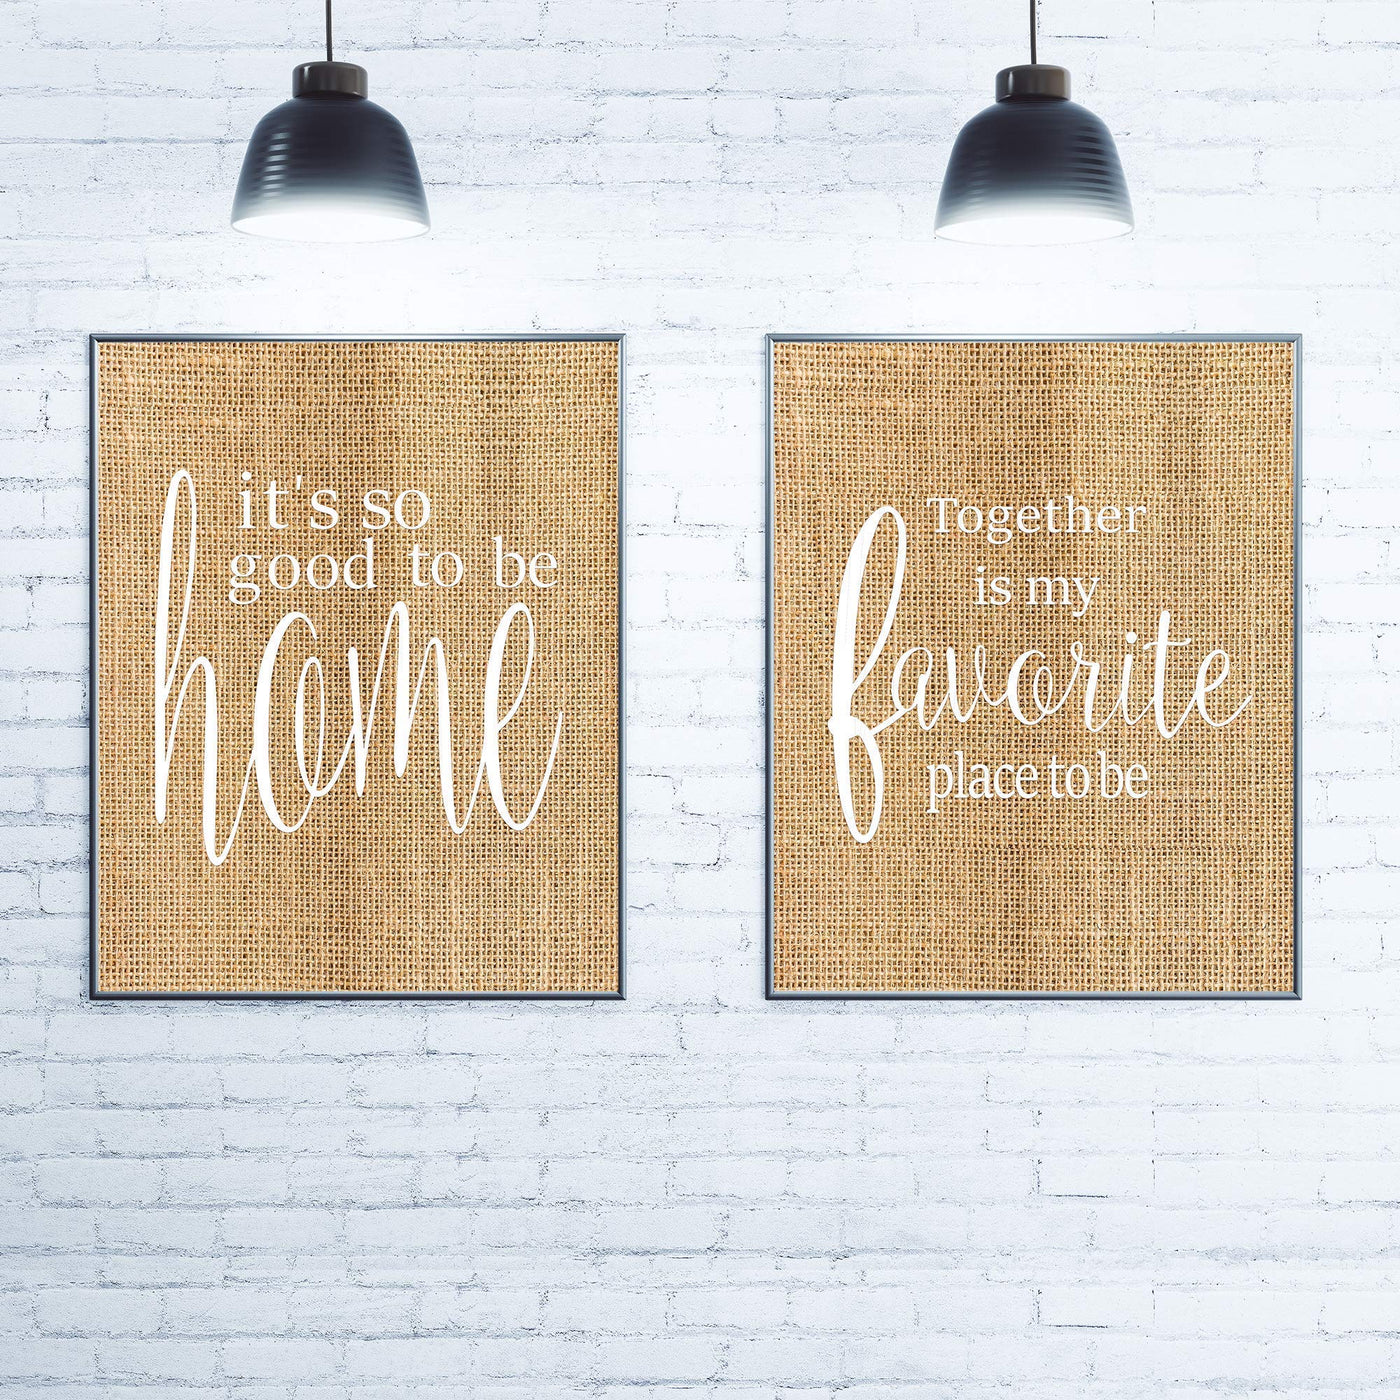 Home 2-Piece Wall Art Set- 8 x 10s Wall Prints-Ready to Frame."Good To Be Home-Together Is My Fav Place". Home-Kitchen-Living-Family Wall Decor. Great Reminders of Family. Great Housewarming Gift!